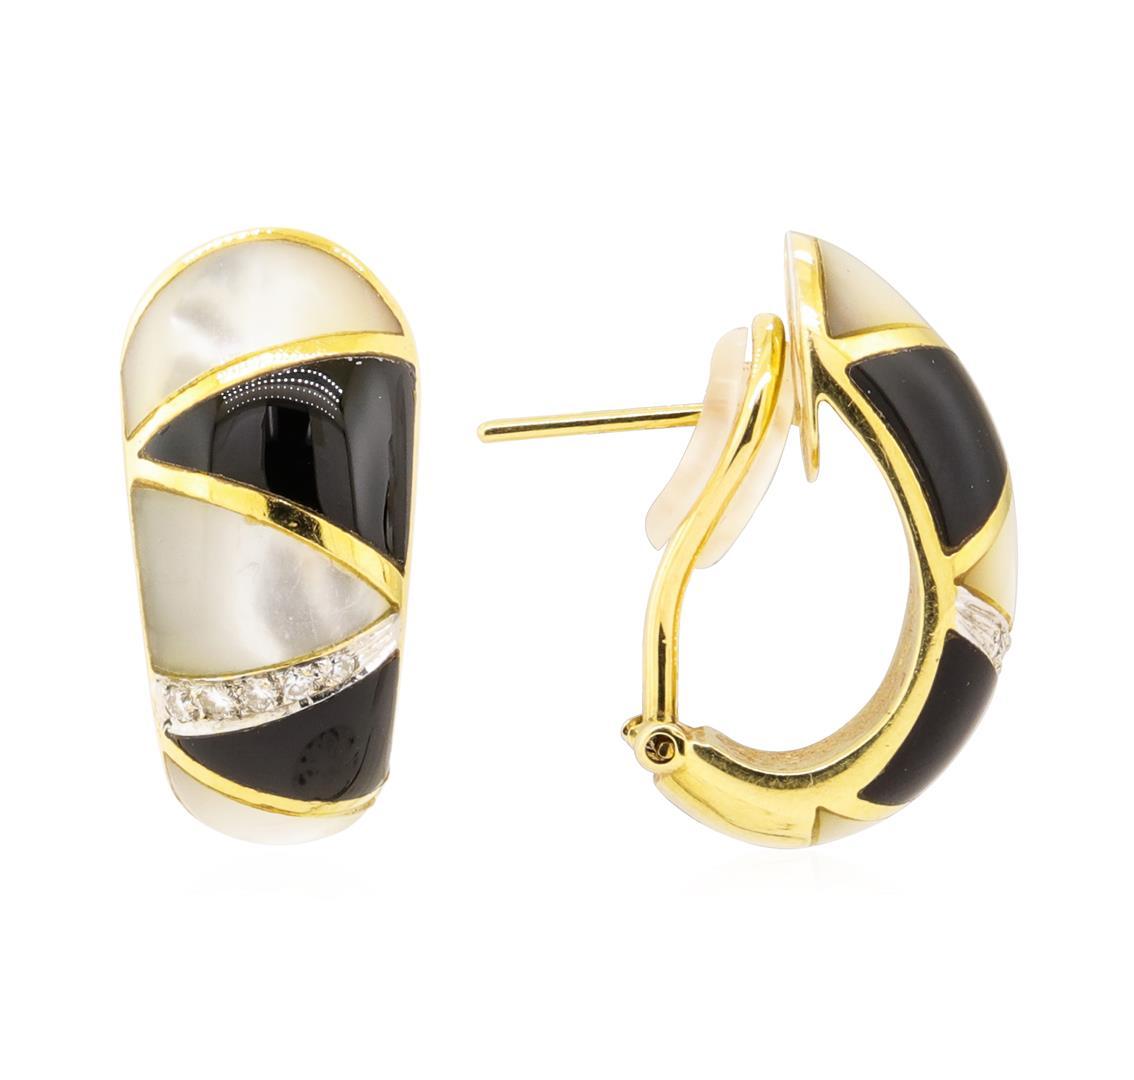 0.10 ctw Diamond, Onyx, and Mother of Pearl Earrings - 18KT Yellow Gold